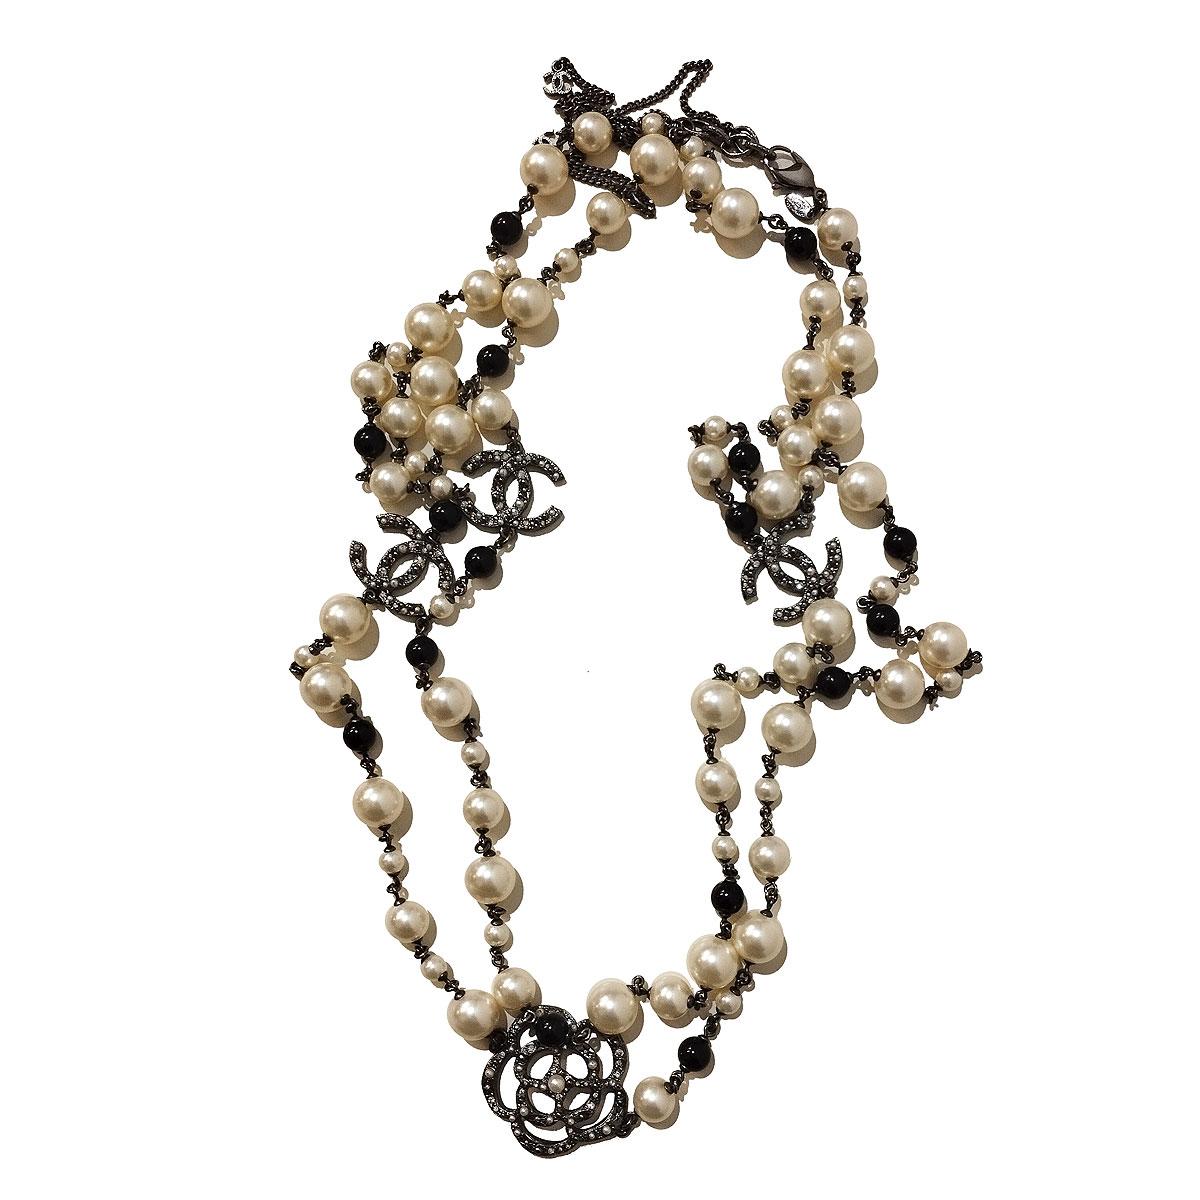 Chanel CC necklace with pearls and camellia
Burnished metal
Faux pearls and crystals
Total length 162 cm
Portable to 1,2 or 3 turns
With dustbag
Perfect conditions
Express shipping